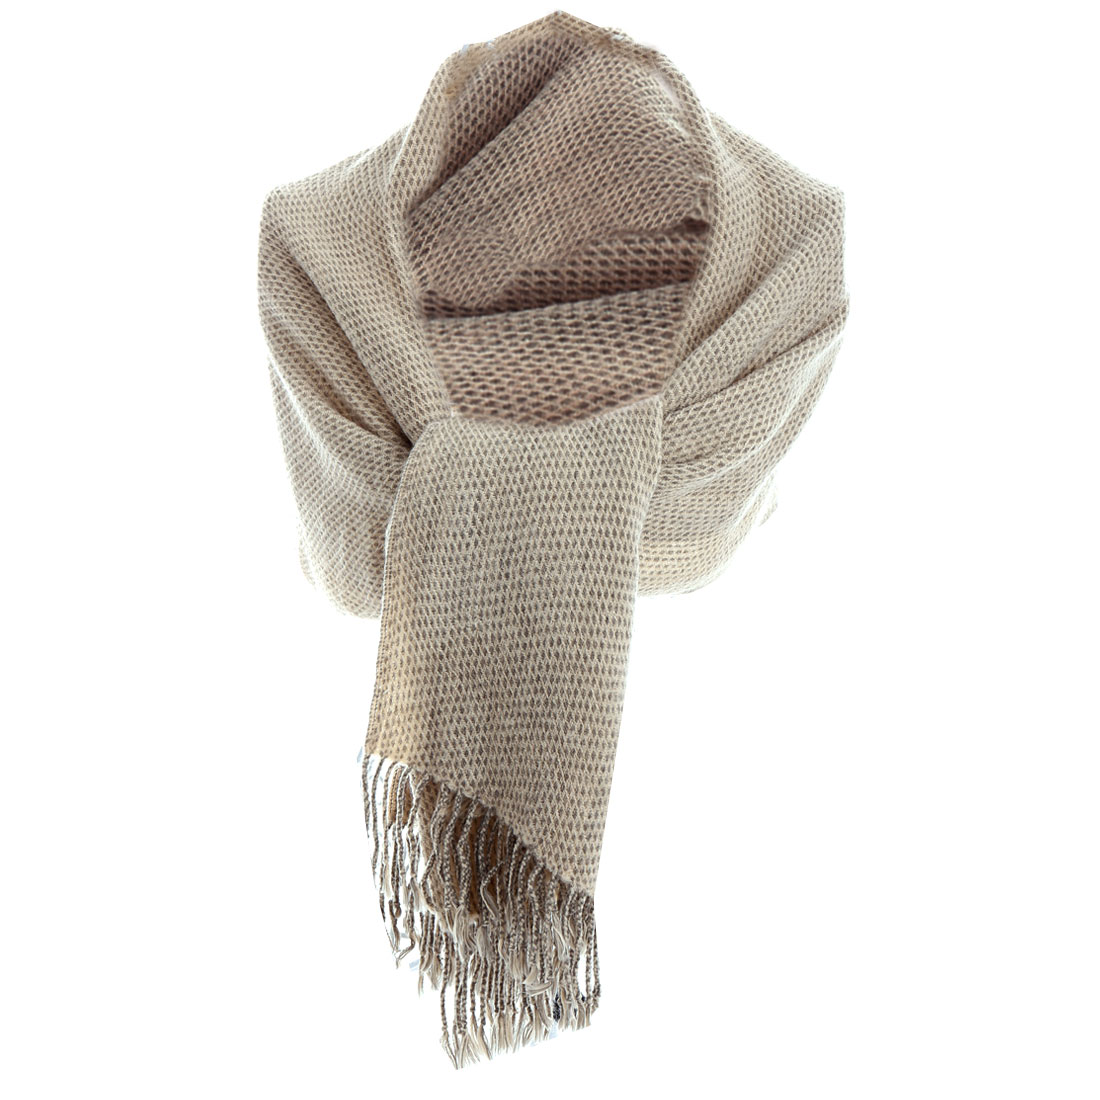 Unique Bargains Stylish Women Knitted Soft Warm Winter Wearing Scarf